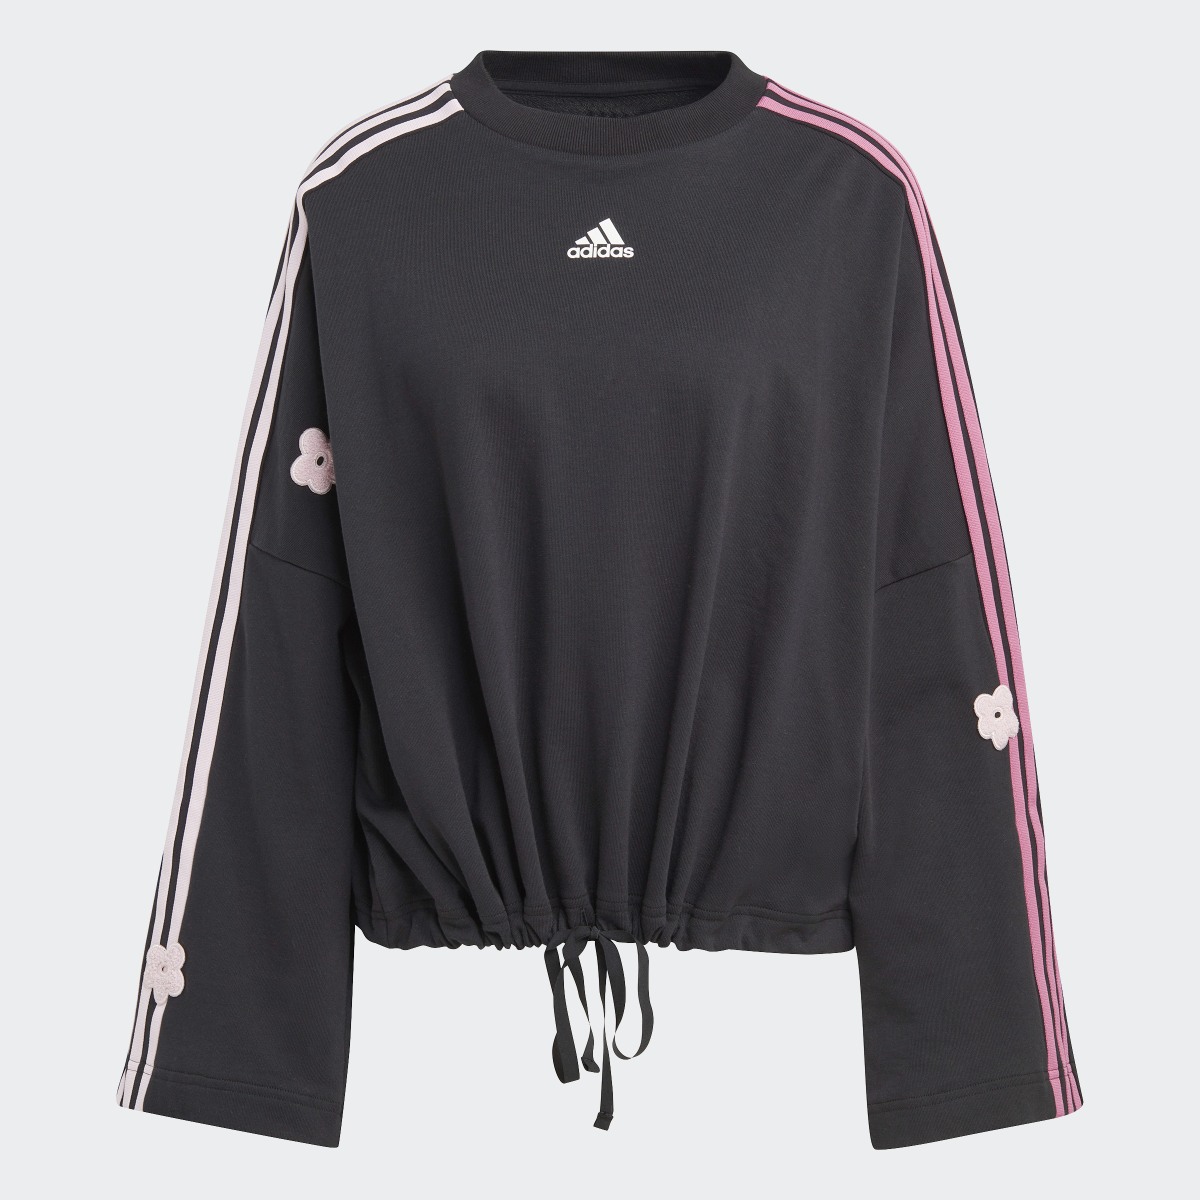 Adidas 3-Stripes Sweatshirt with Chenille Flower Patches. 5